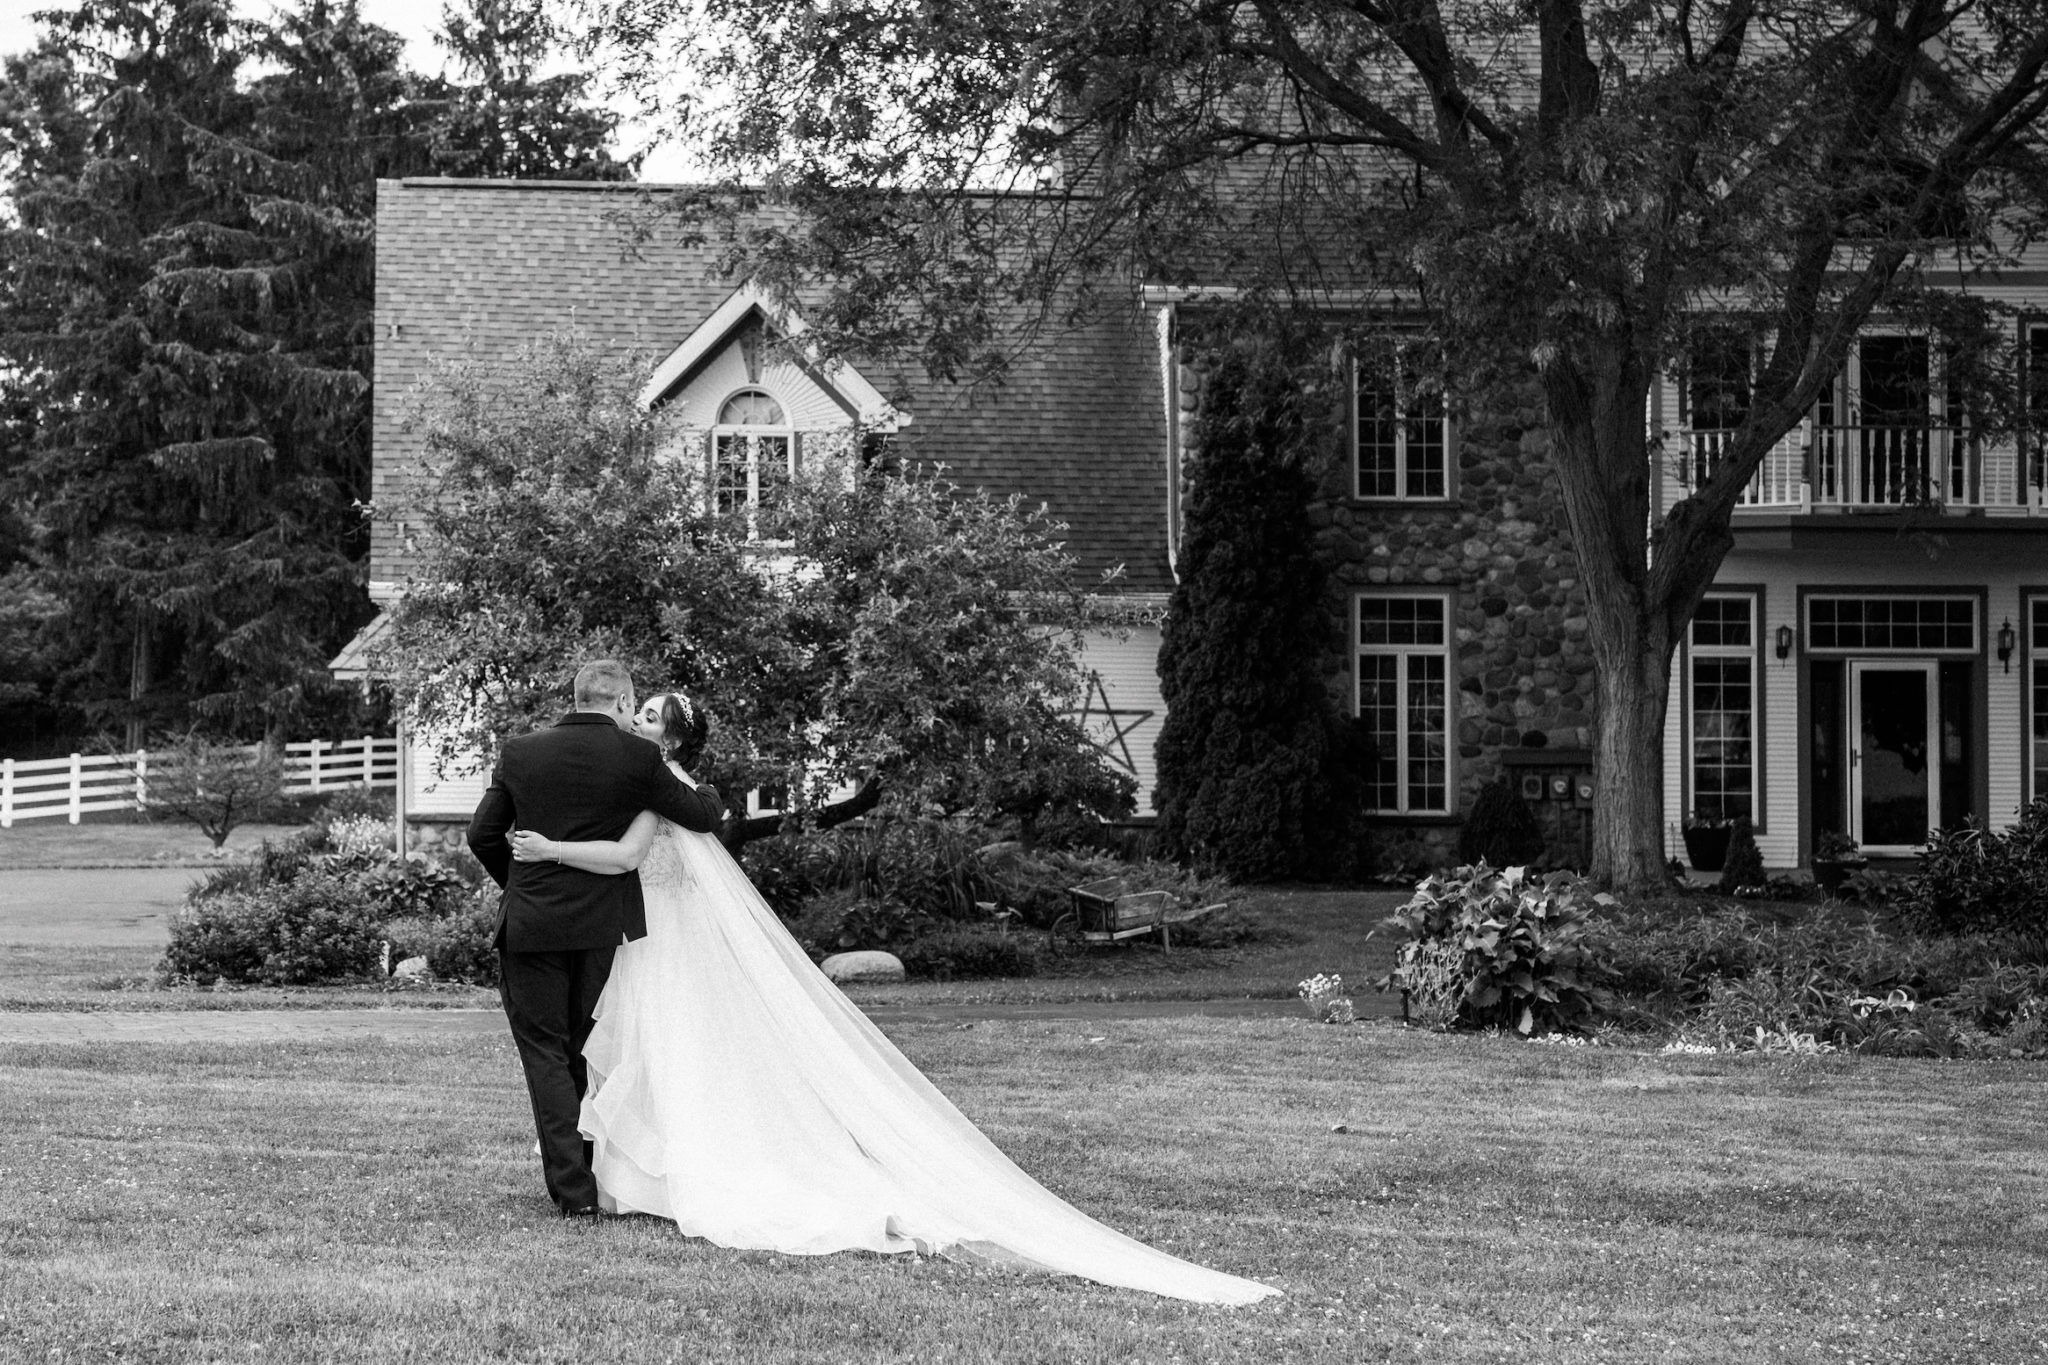 a bride and groom kissing and walking away after their wedding recessional